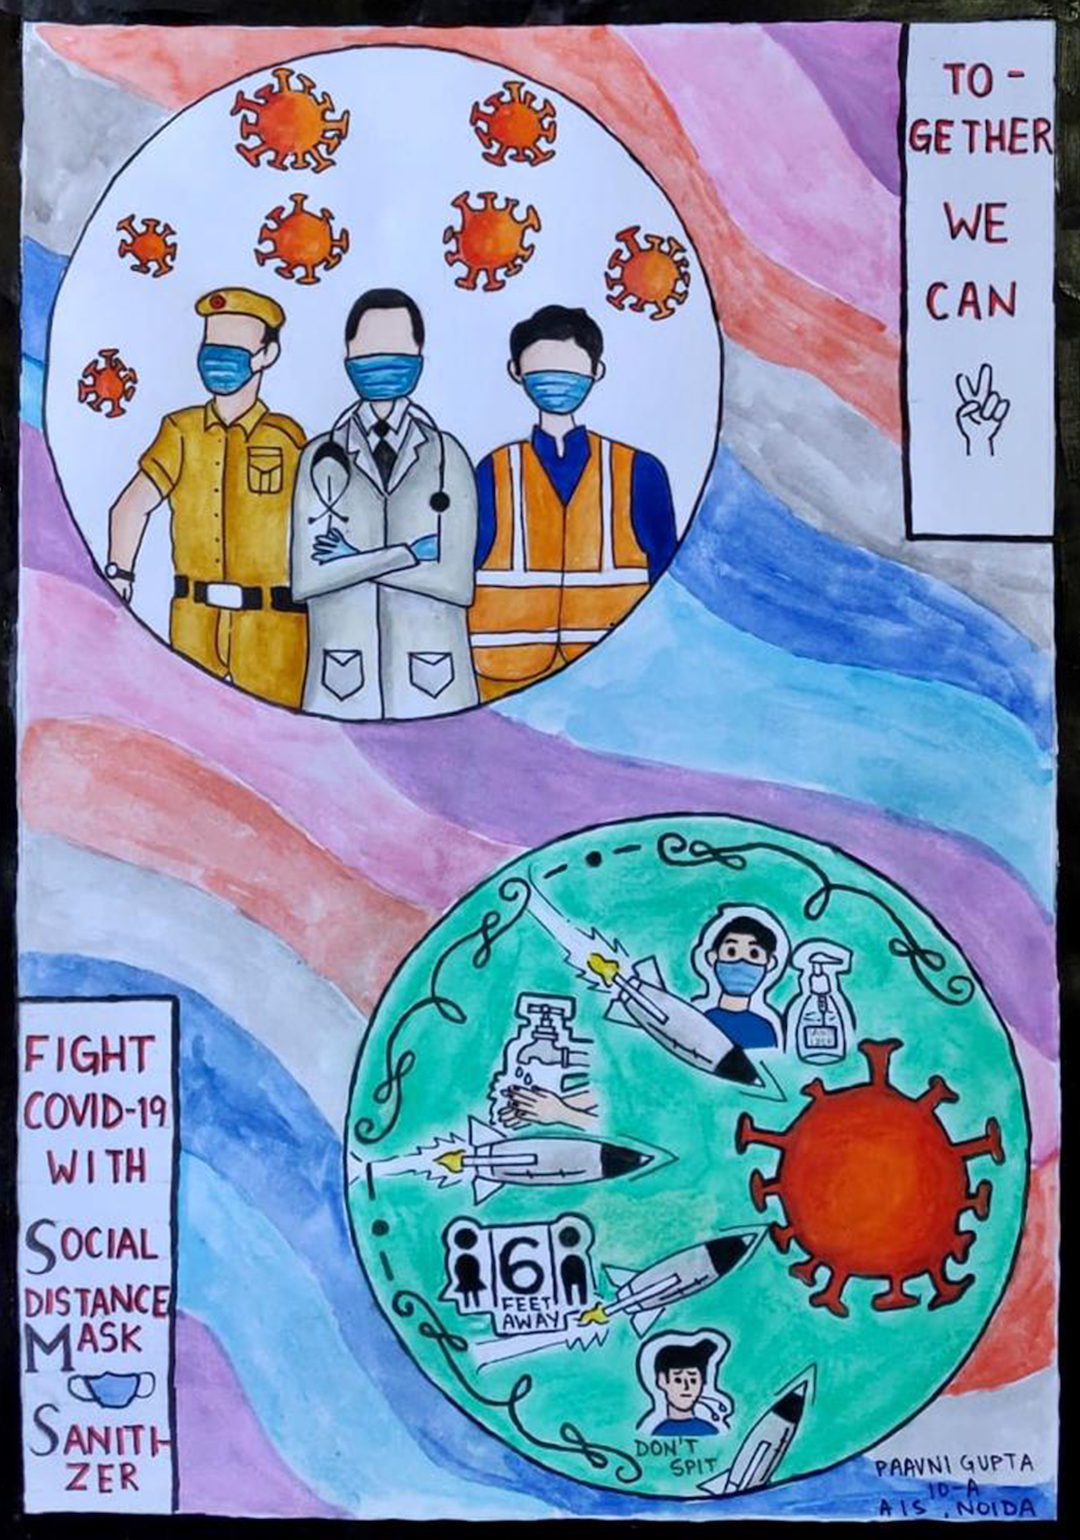 St. Anthony's Update - Drawing Competition organized by CSRBOX ON THE  OCCASION OF MAHAVEER JAYANTI Lakshya Jain (4th) STOOD Runner up Date :  April 2020 | Facebook